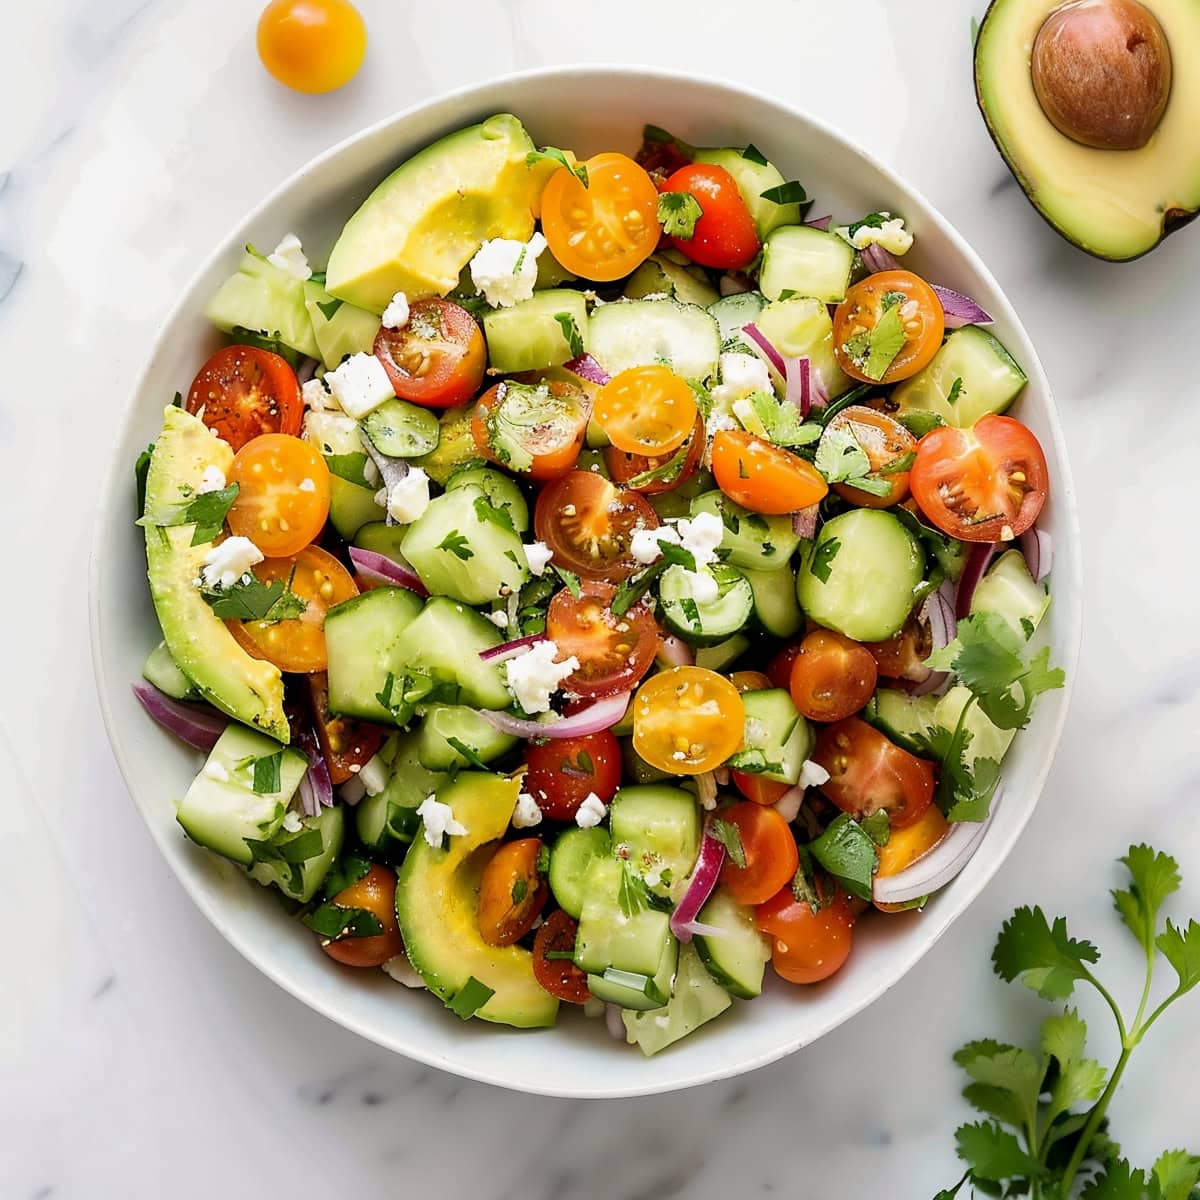 A bowl of fresh salad with avocado slices, cucumbers, cherry tomatoes and crumbled feta.